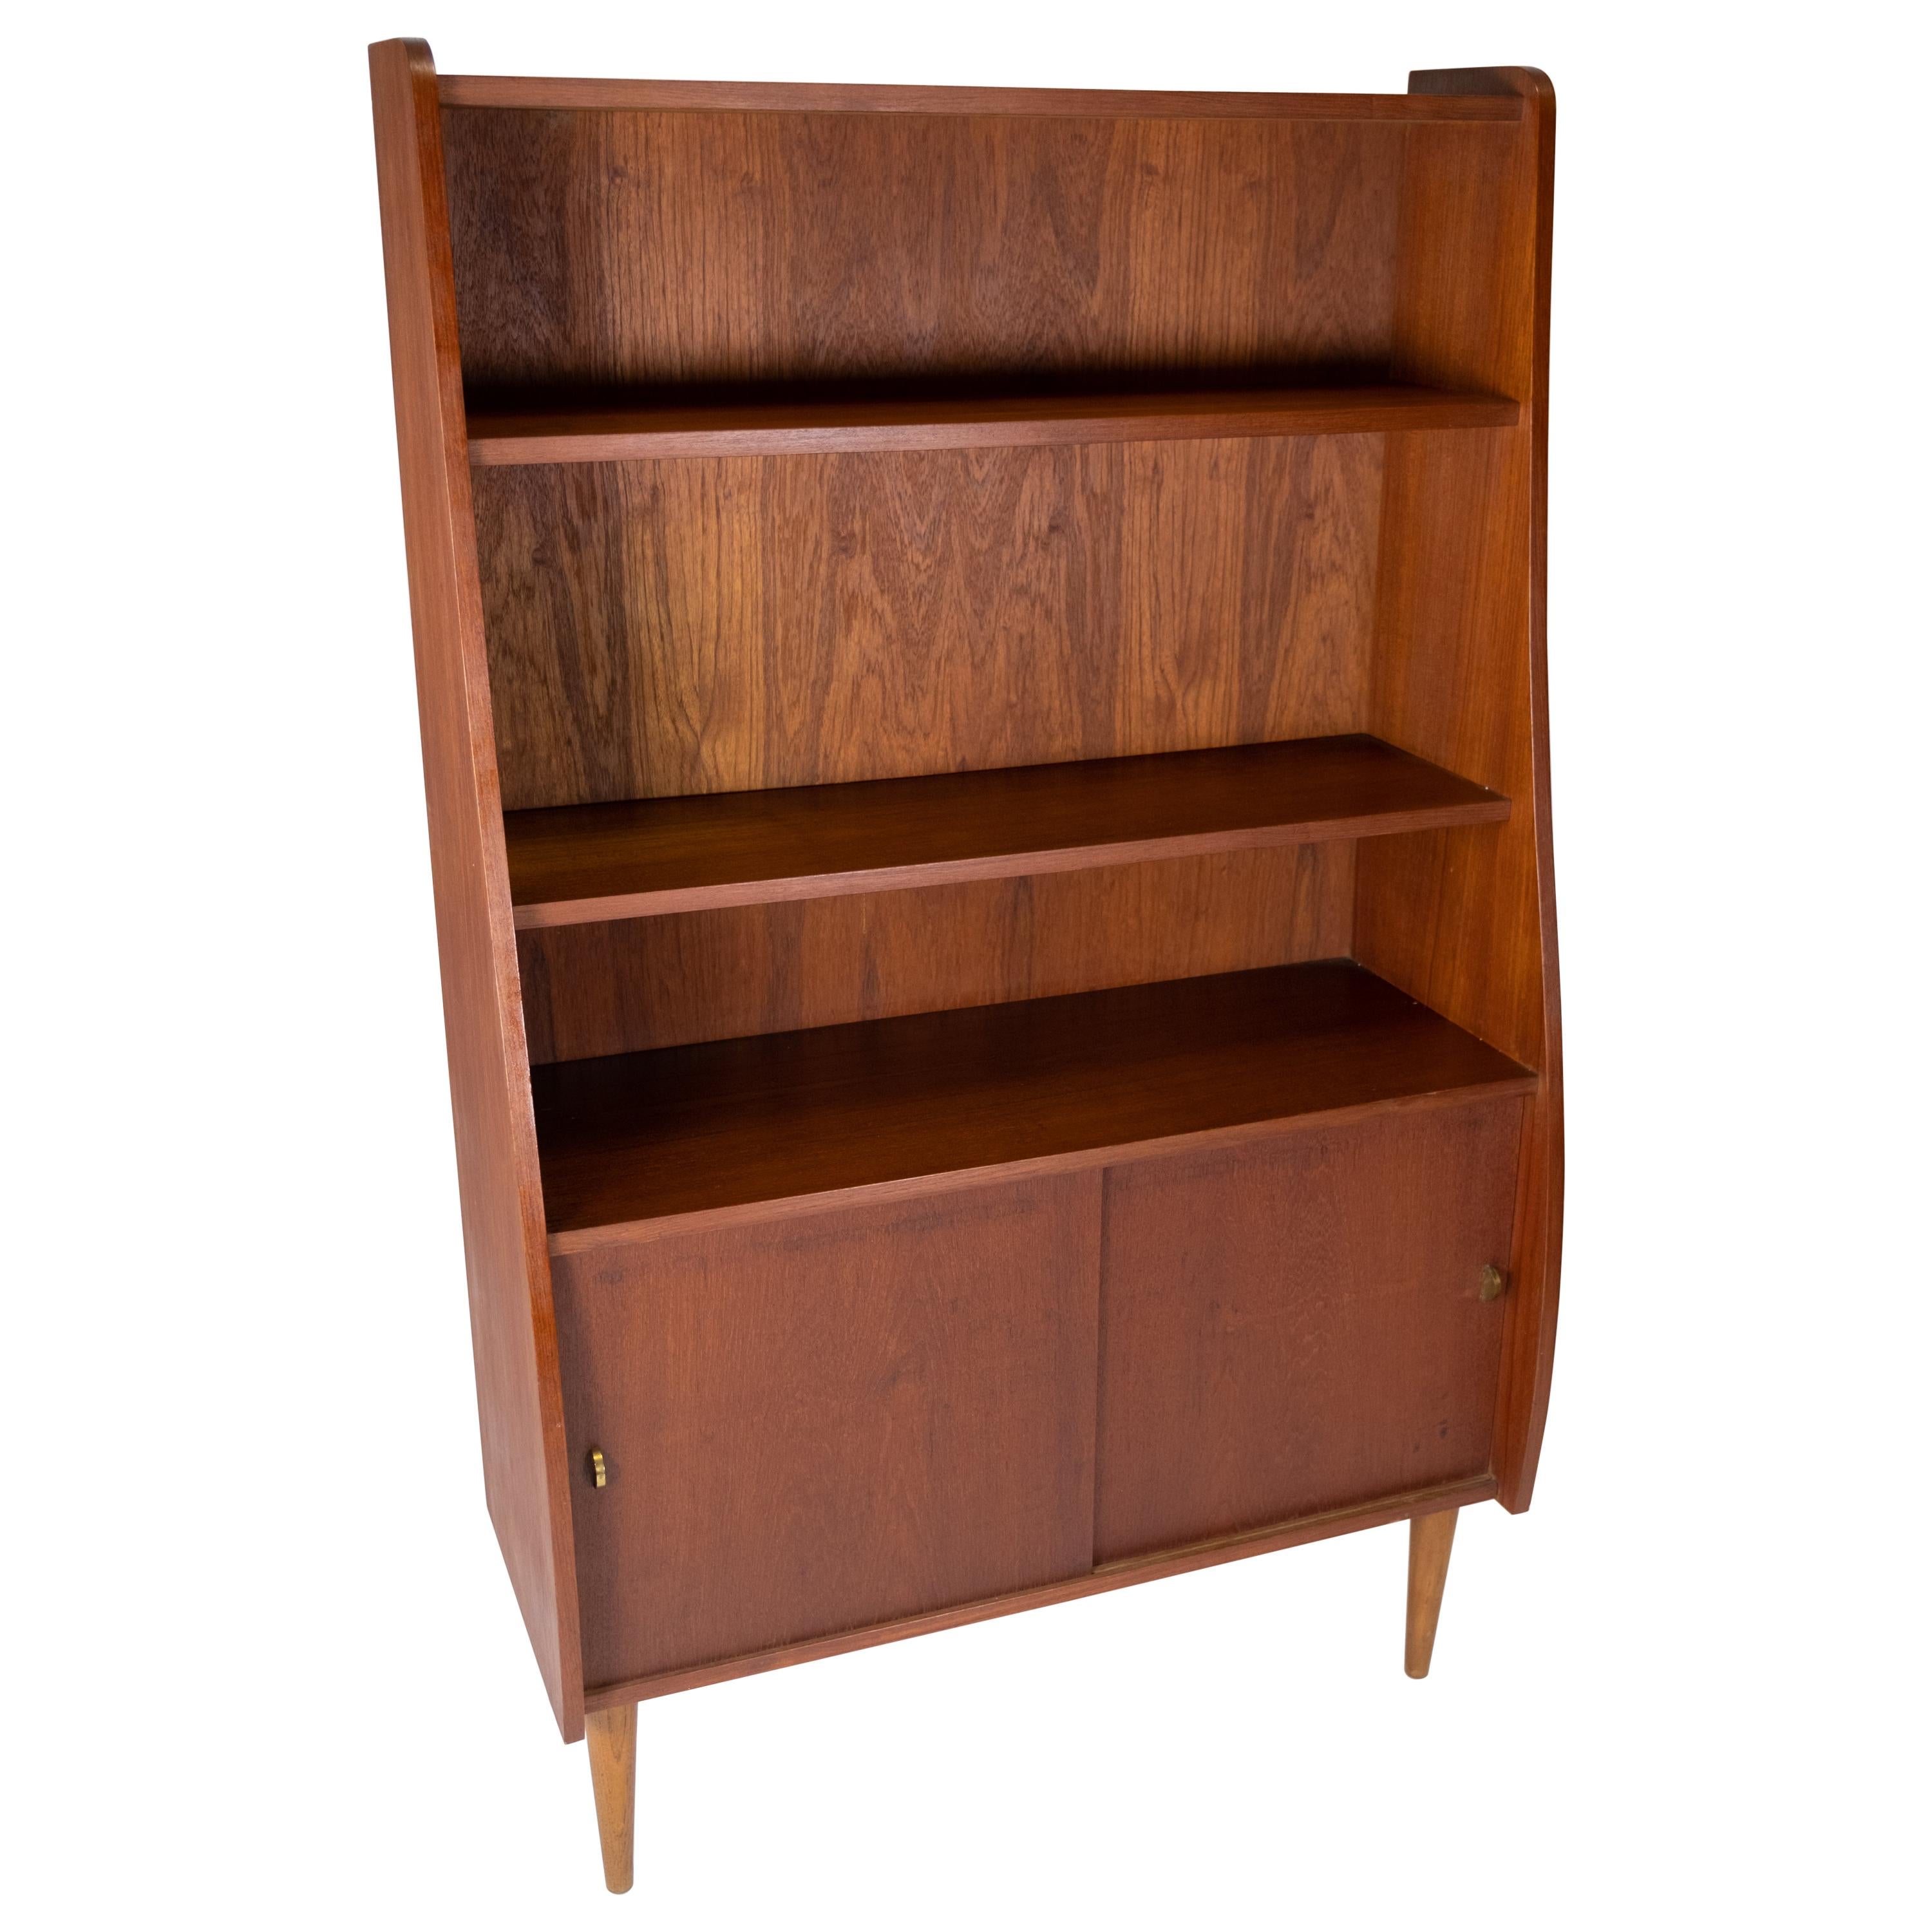 Bookcase in Teak of Danish Design from the 1960s For Sale